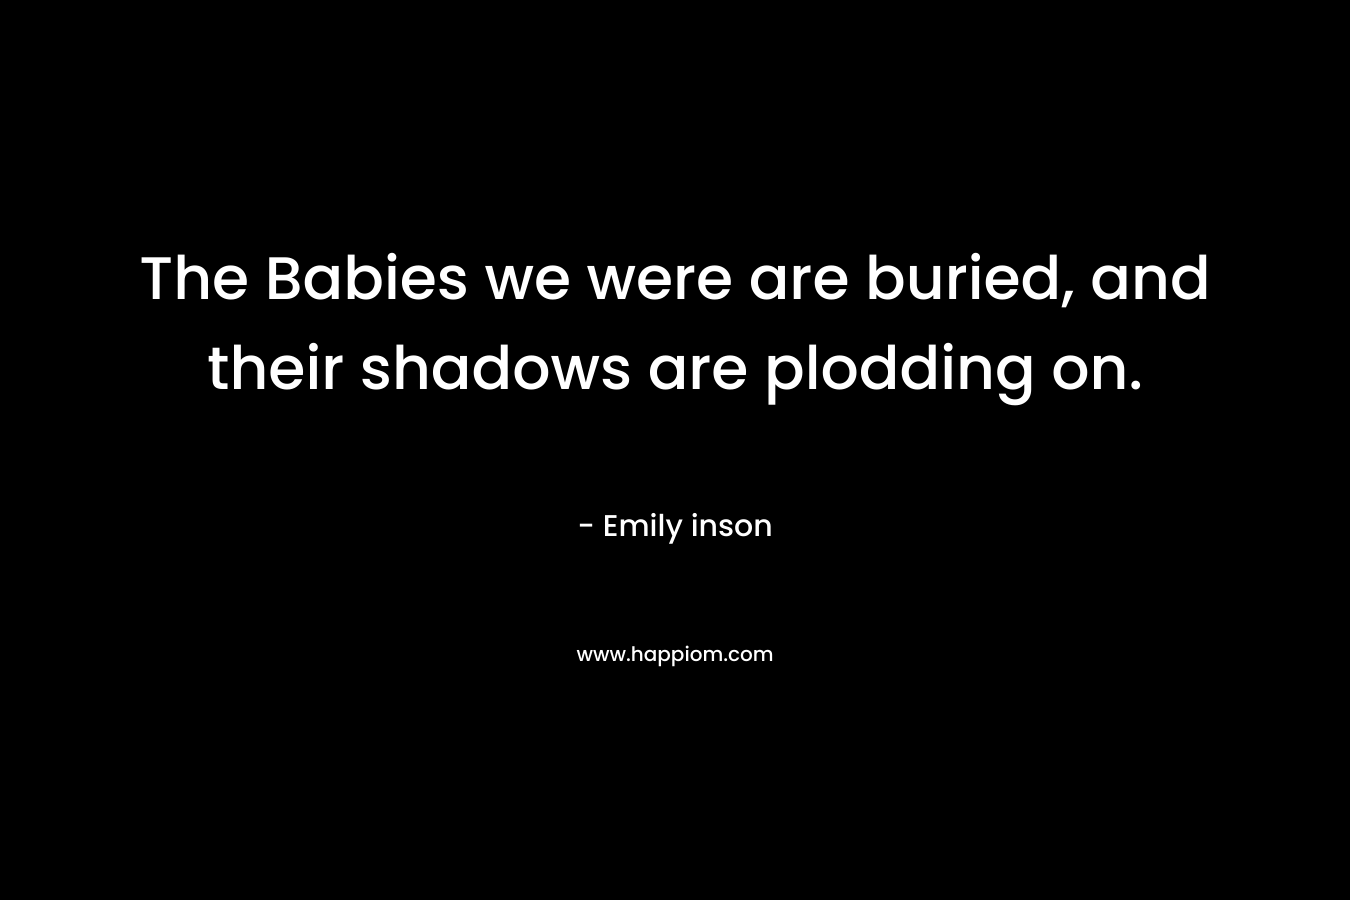 The Babies we were are buried, and their shadows are plodding on.